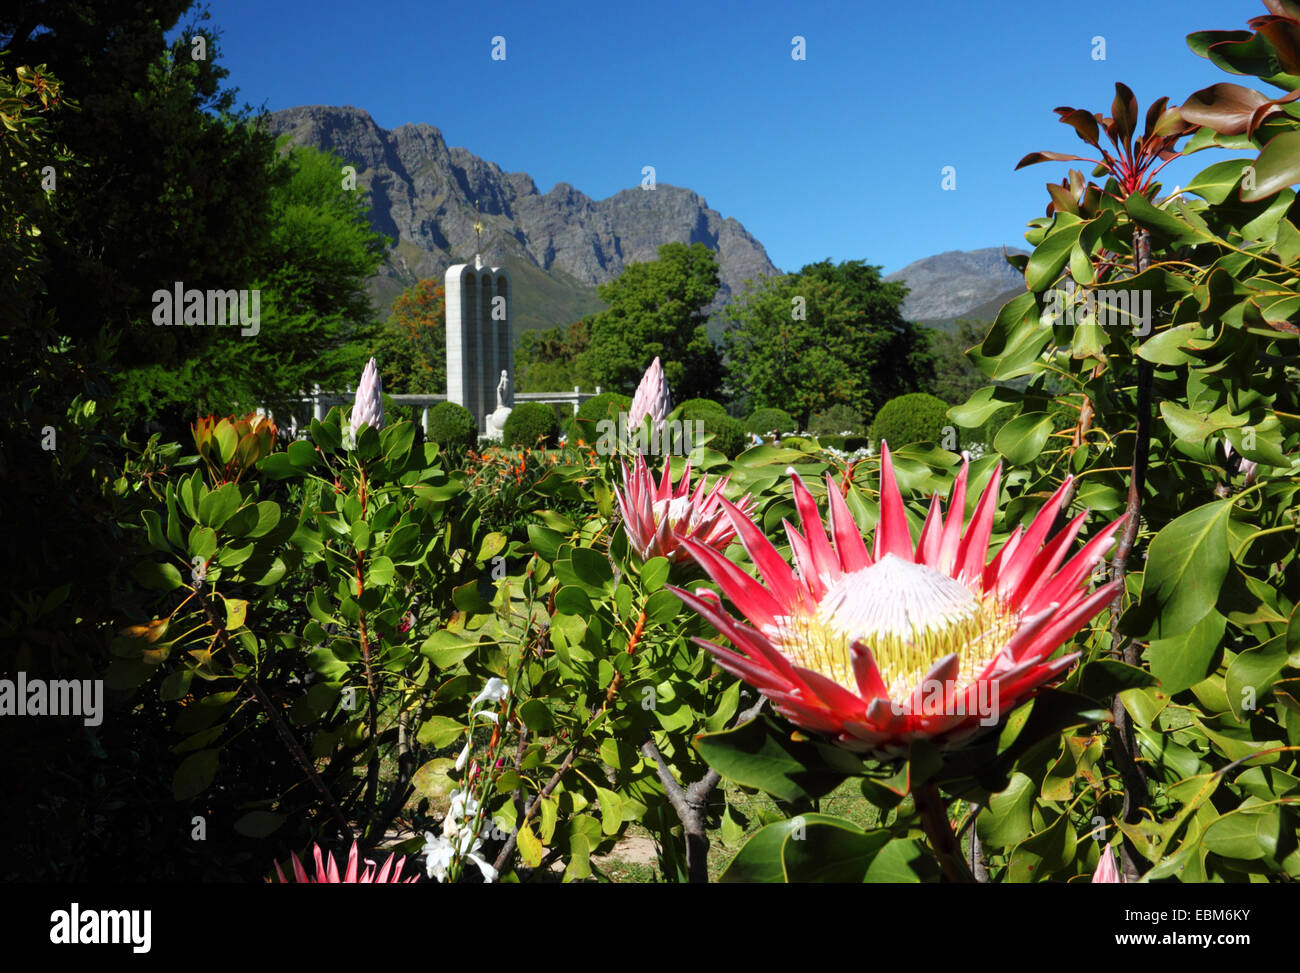 A King Protea flower (Protea cynaroides), Hugenot Monument, Franschhoek, South Africa. Stock Photo